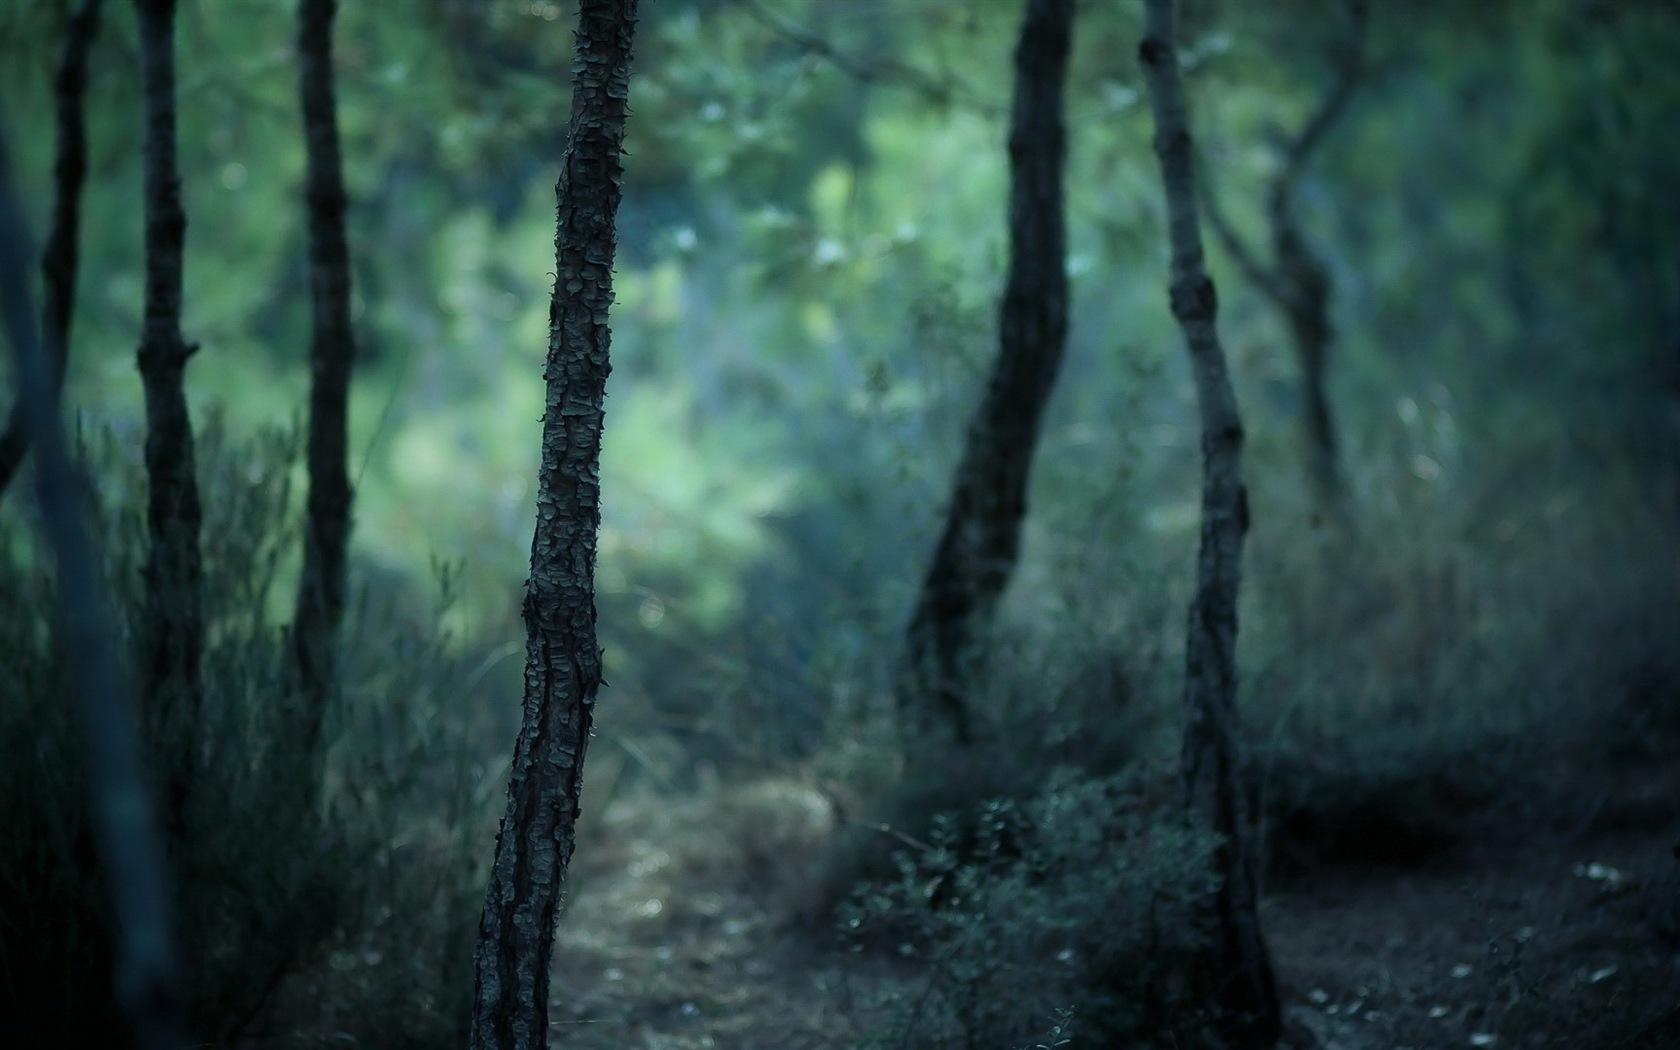 Windows 8 theme forest scenery HD wallpapers #7 - 1680x1050